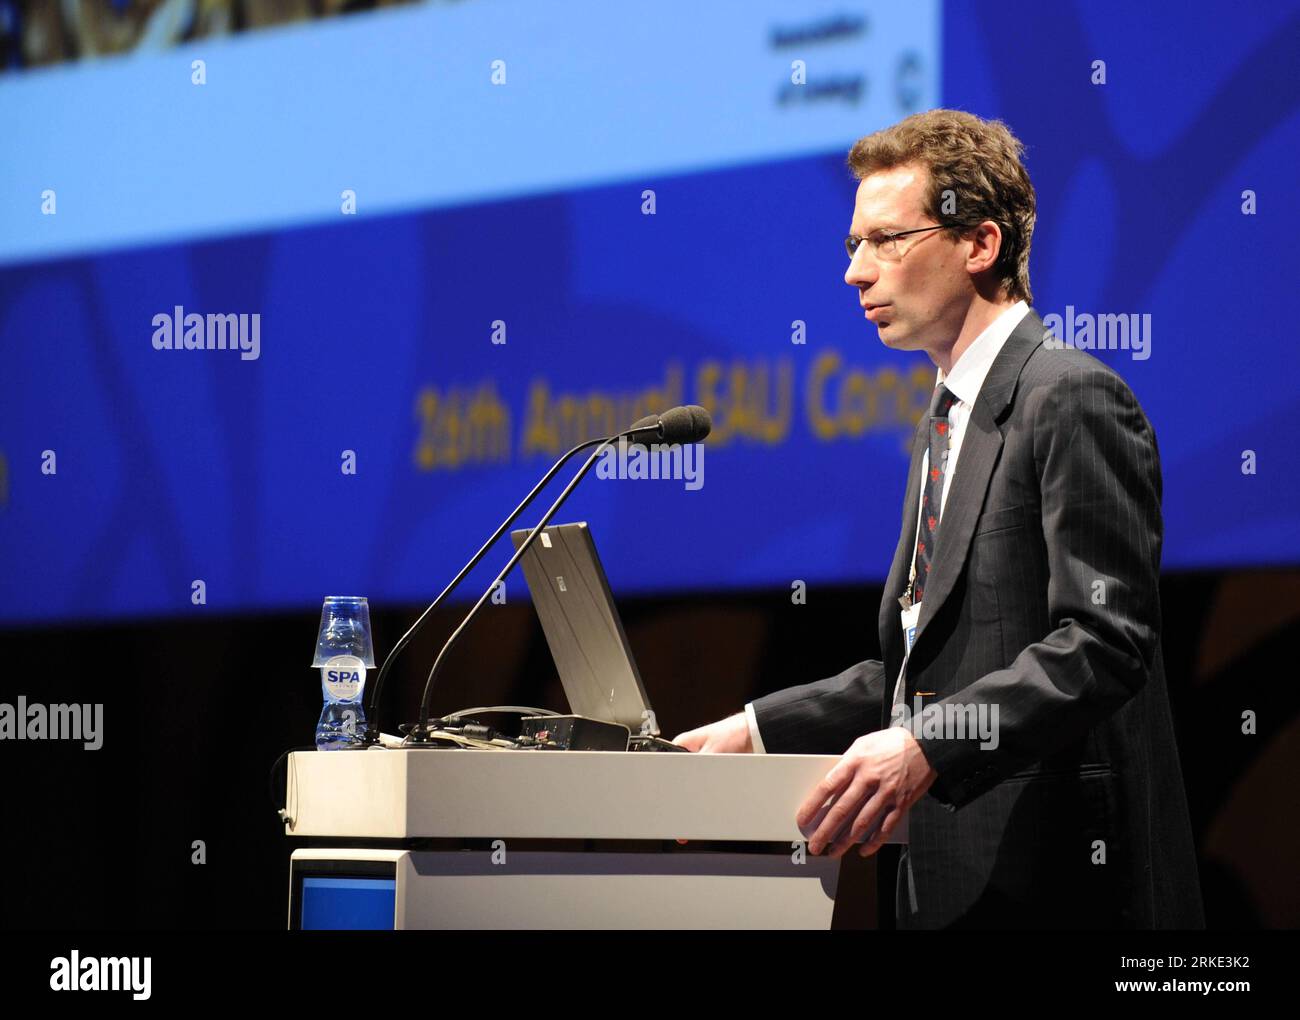 Bildnummer: 55047182  Datum: 19.03.2011  Copyright: imago/Xinhua (110319) -- VIENNA, March 19, 2011 (Xinhua) -- Marcus John Drake, a urology scholar makes a report on Overactive Bladder at the 26th Annual Congress of the European Association of Urology (2011 EAU congress) in Vienna, Austria, March 19, 2011. The five-day 2011 EAU congress kicked off here on Friday. The annual EAU Congress is a platform for the international urological community to share the latest and the most relevant knowledge with medical experts practising across the board. (Xinhua/Xu Liang) (cl) AUSTRIA-VIENNA-EAU-ANNUAL C Stock Photo